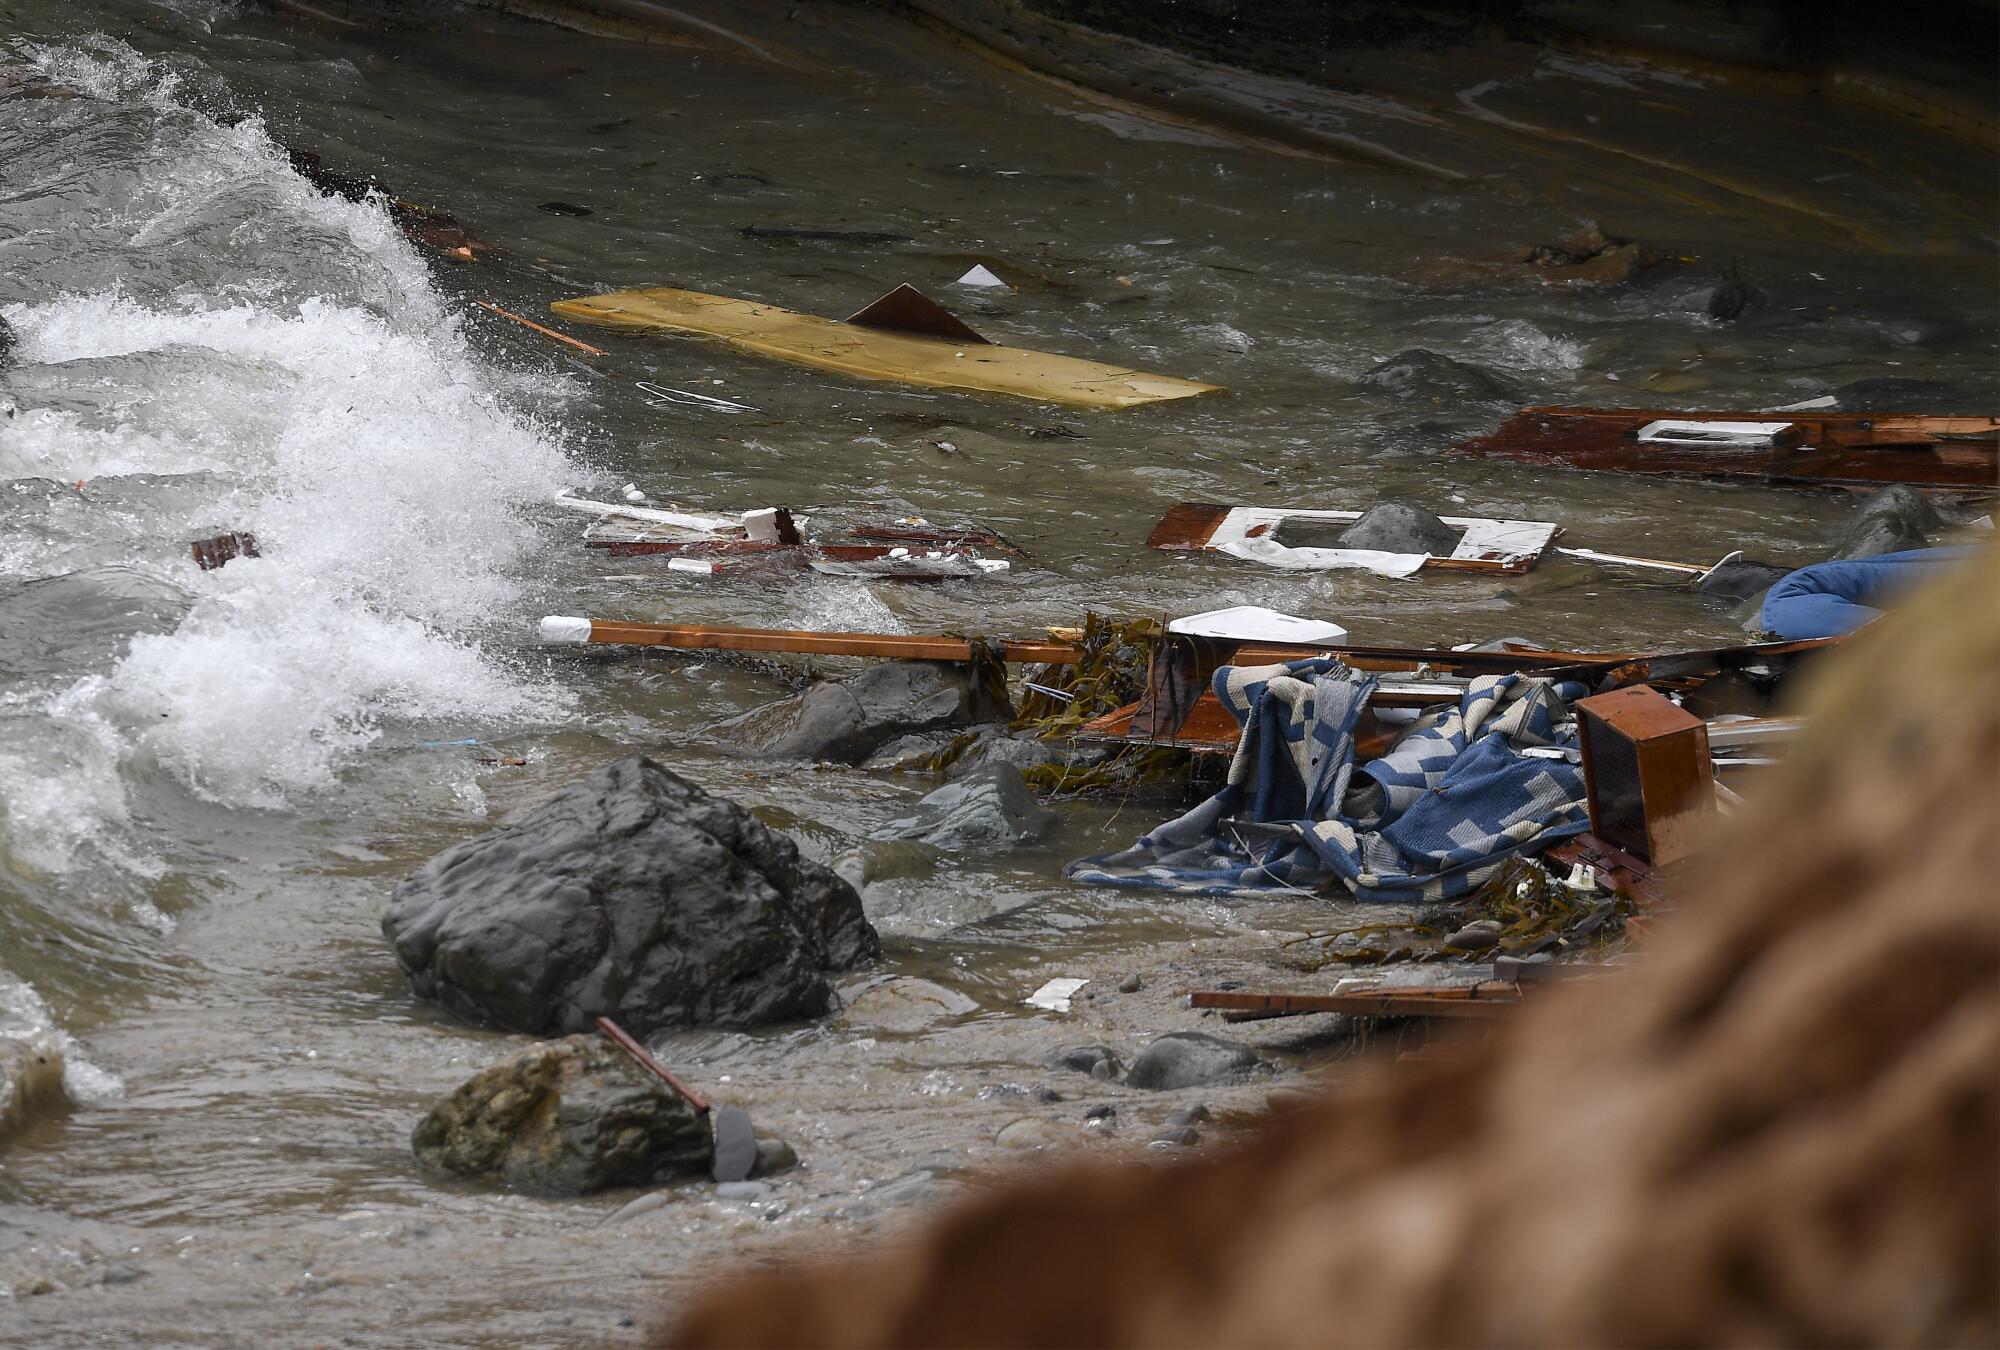 Wreckage and debris washes ashore